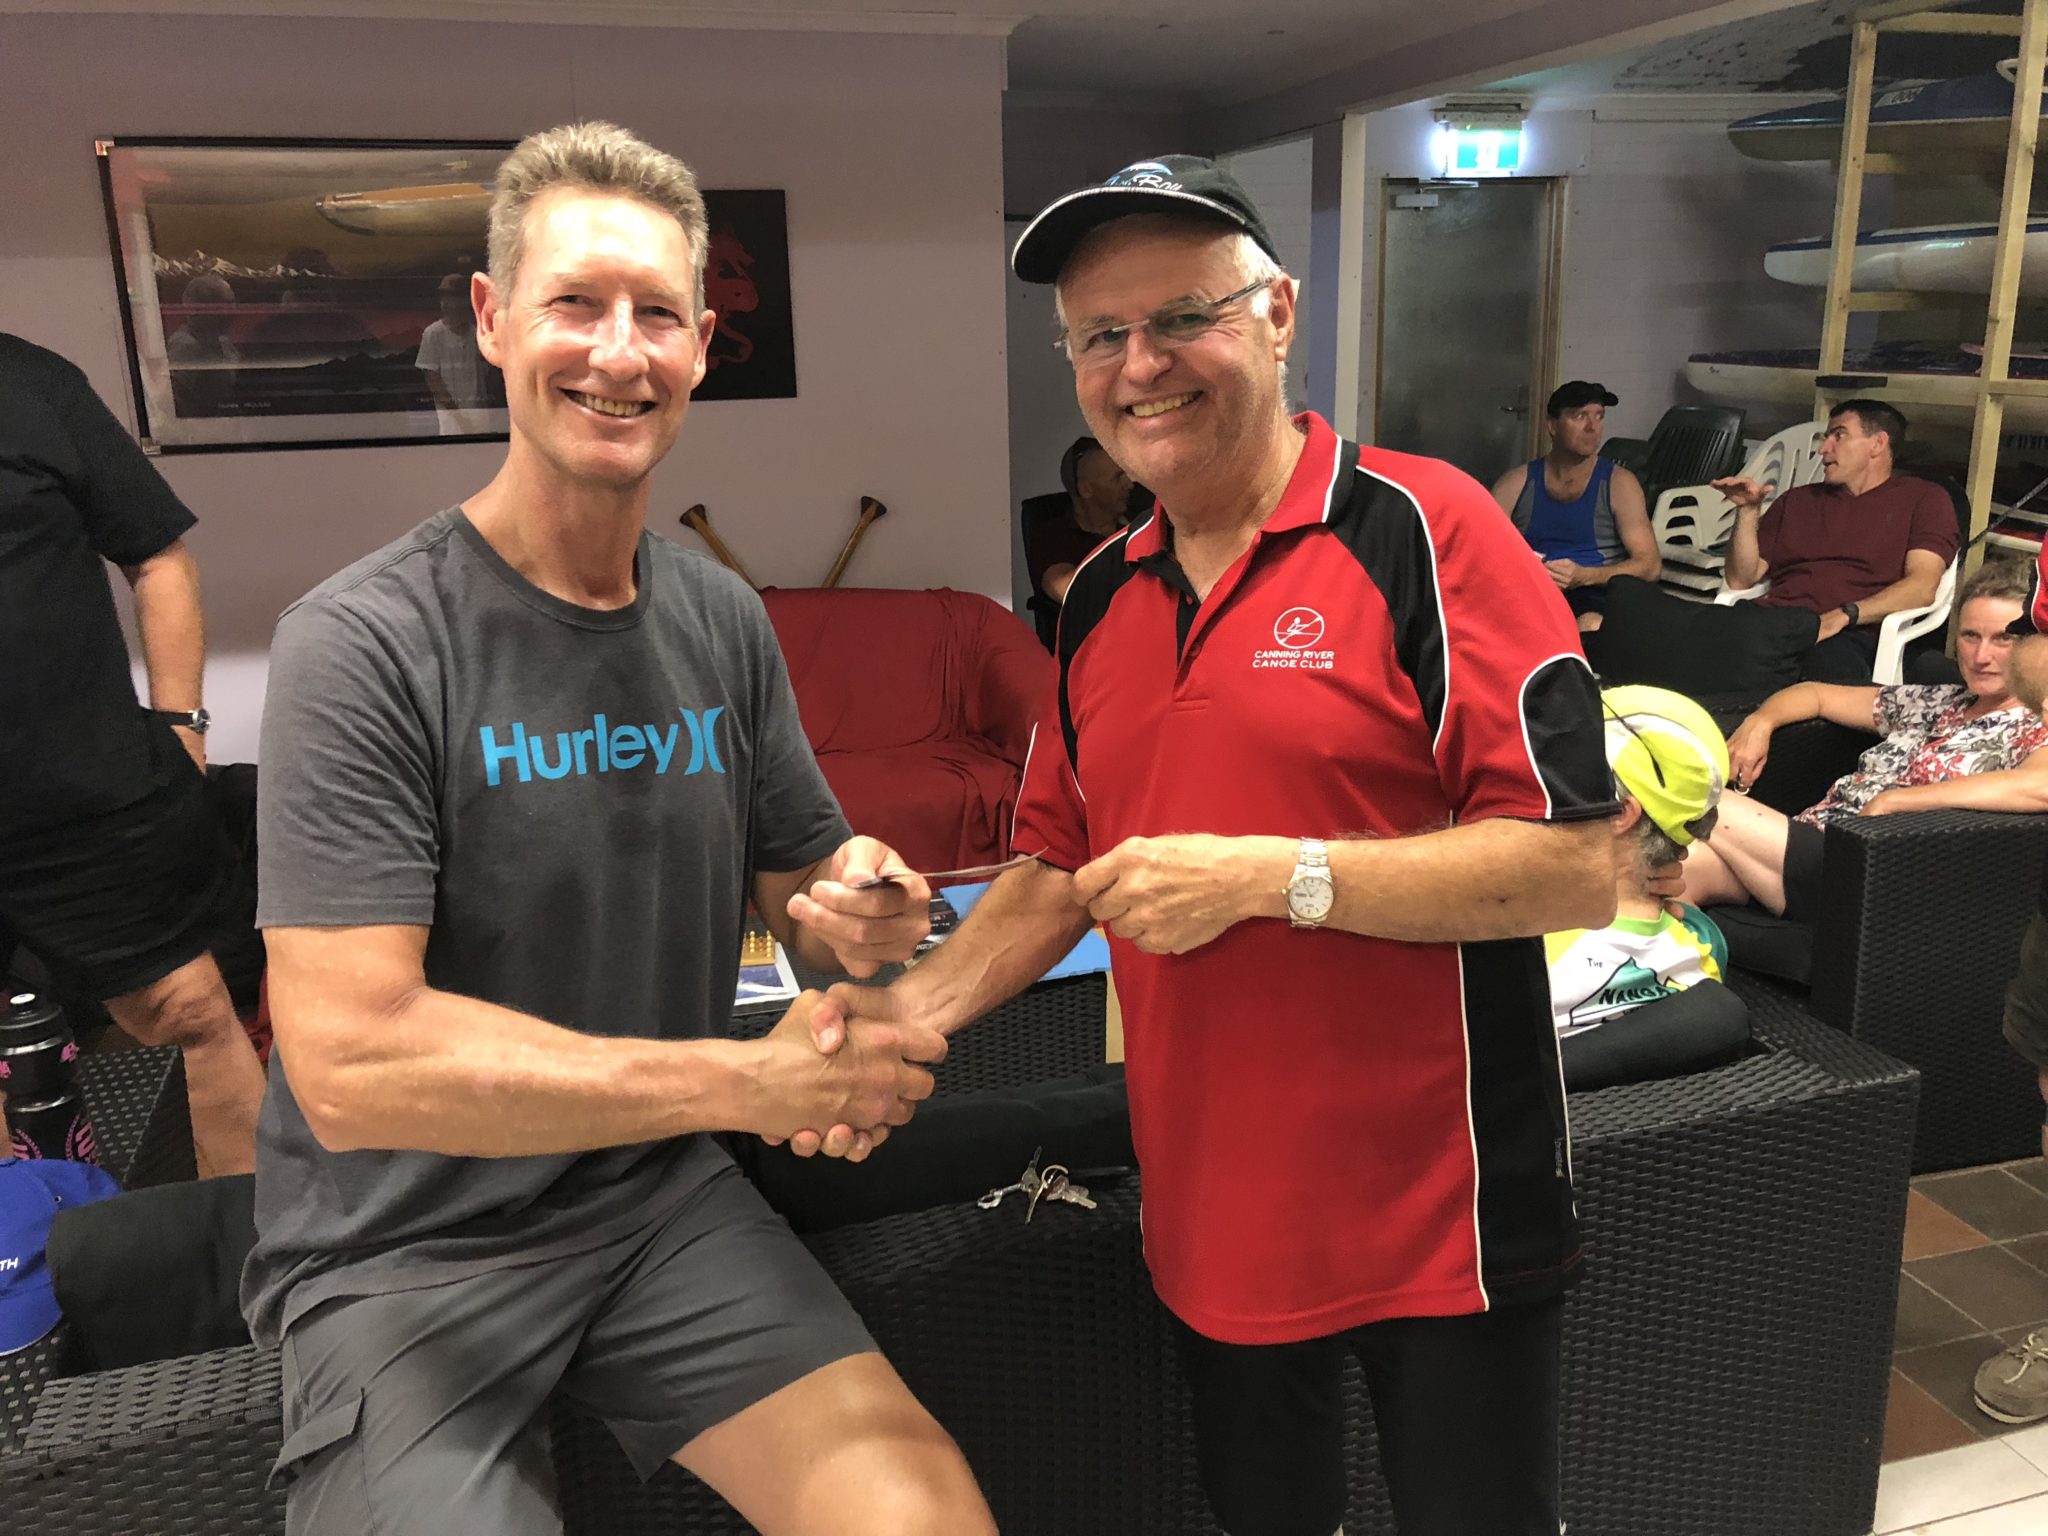 Tues 23rd Jan 2018 : Tonight's photo shows Club Member Les presenting Jeff Stone with a movie voucher